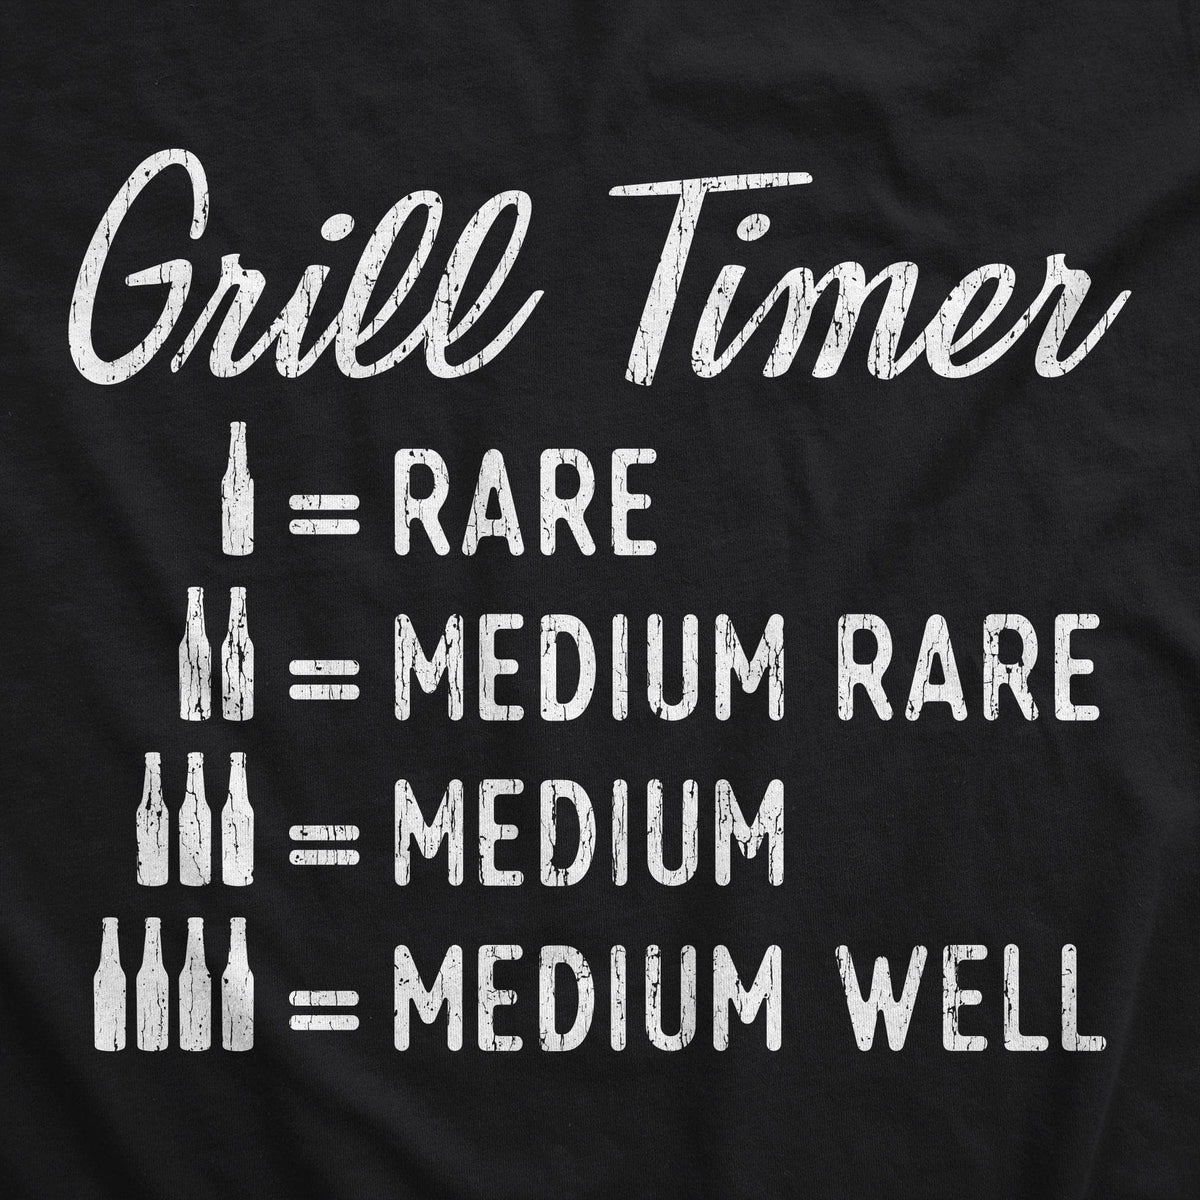 Crazy Dog T-shirts Beer Grill Timer Cookout Apron Funny Backyard BBQ Dad Summer Graphic Gift (Black) - One size, Adult Unisex